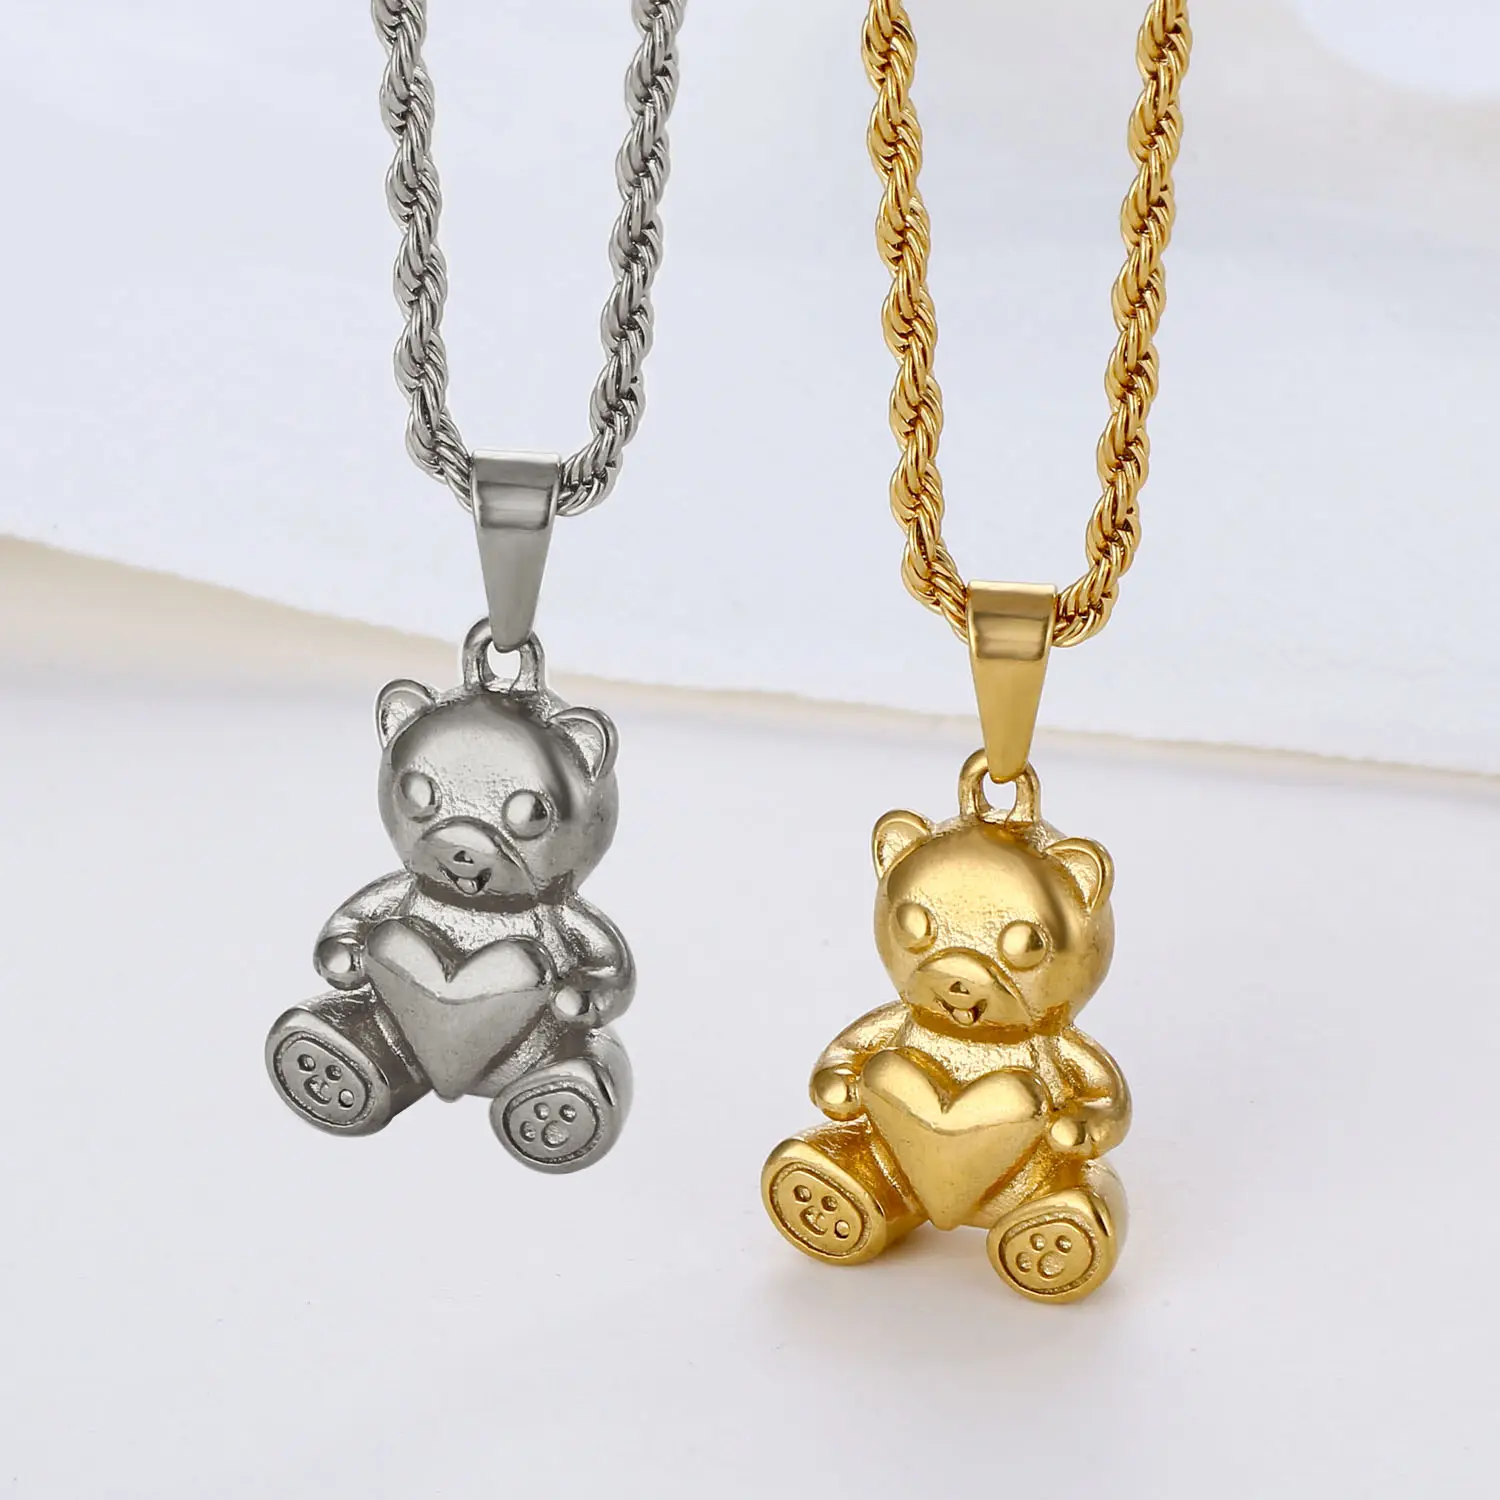 Mini Love Heart Bear Pendant Necklace 18K Gold Plated Stainless Steel Fashion Animal Jewelry Women Girl Necklace Gift